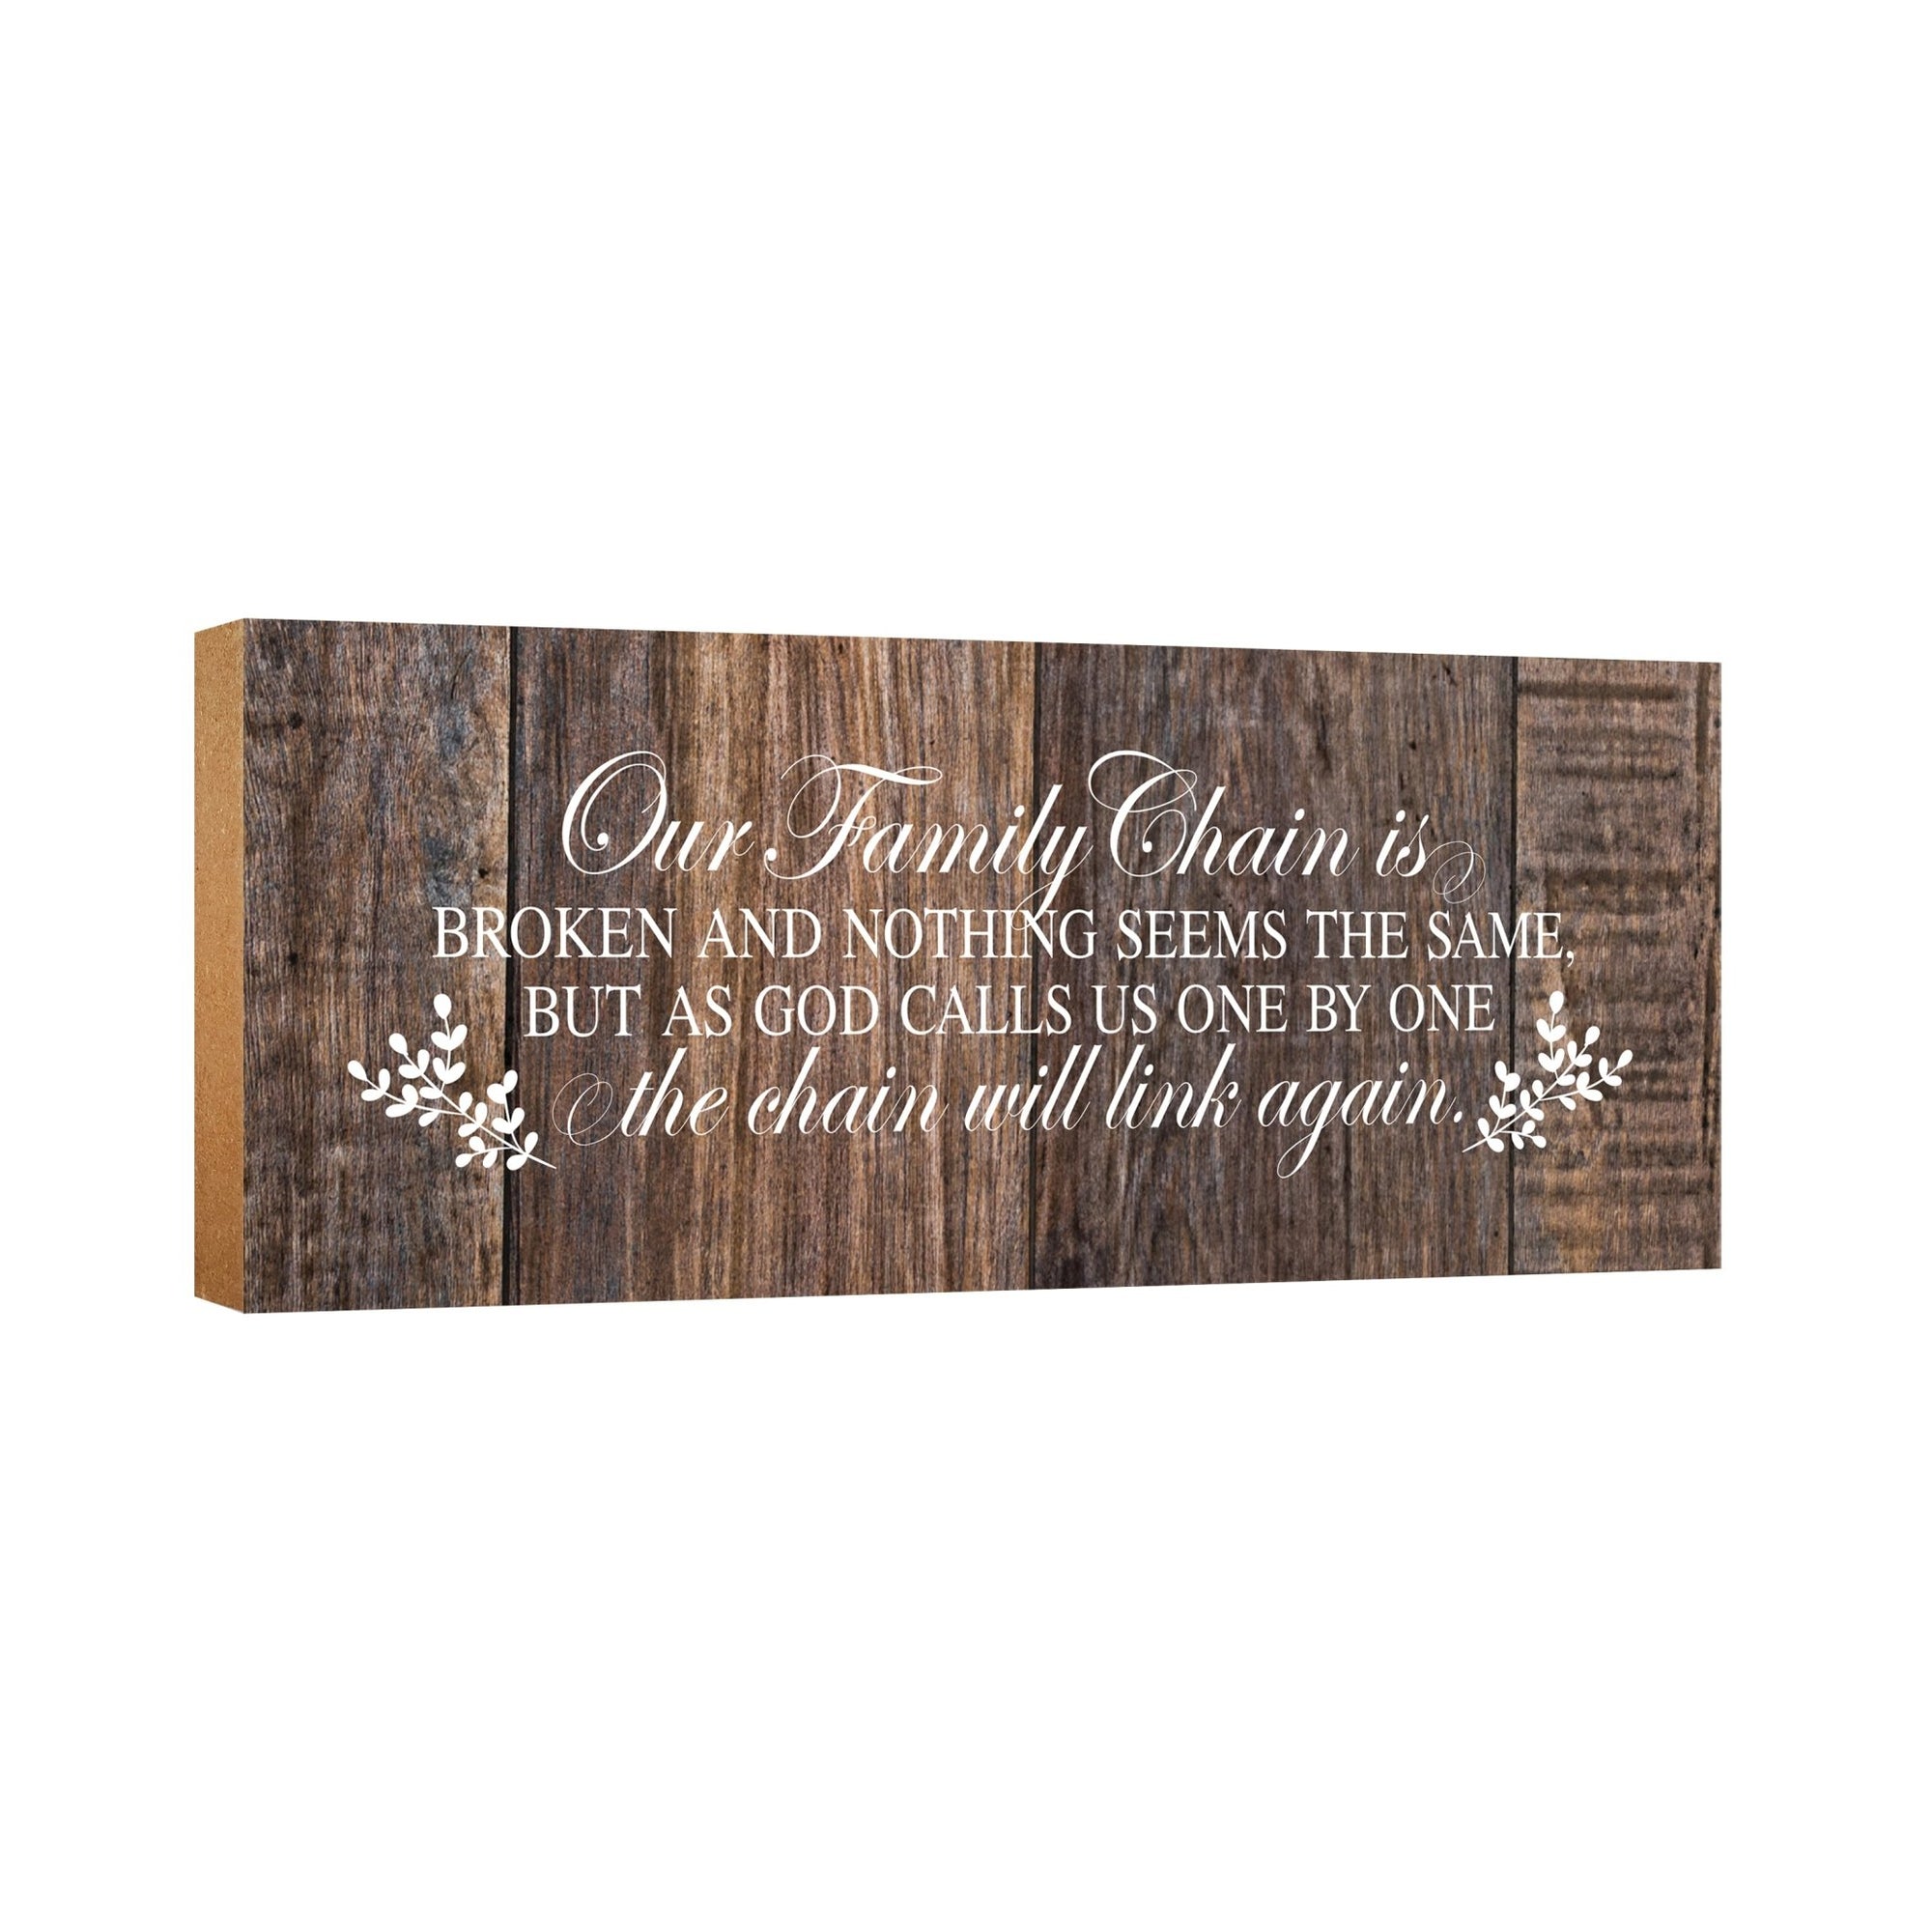 Modern Inspirational Pet Memorial 4x10 inches Wooden Sign (Our Family Chain) Tabletop Plaque Home Decoration Loss of Pet Bereavement Sympathy Keepsake - LifeSong Milestones